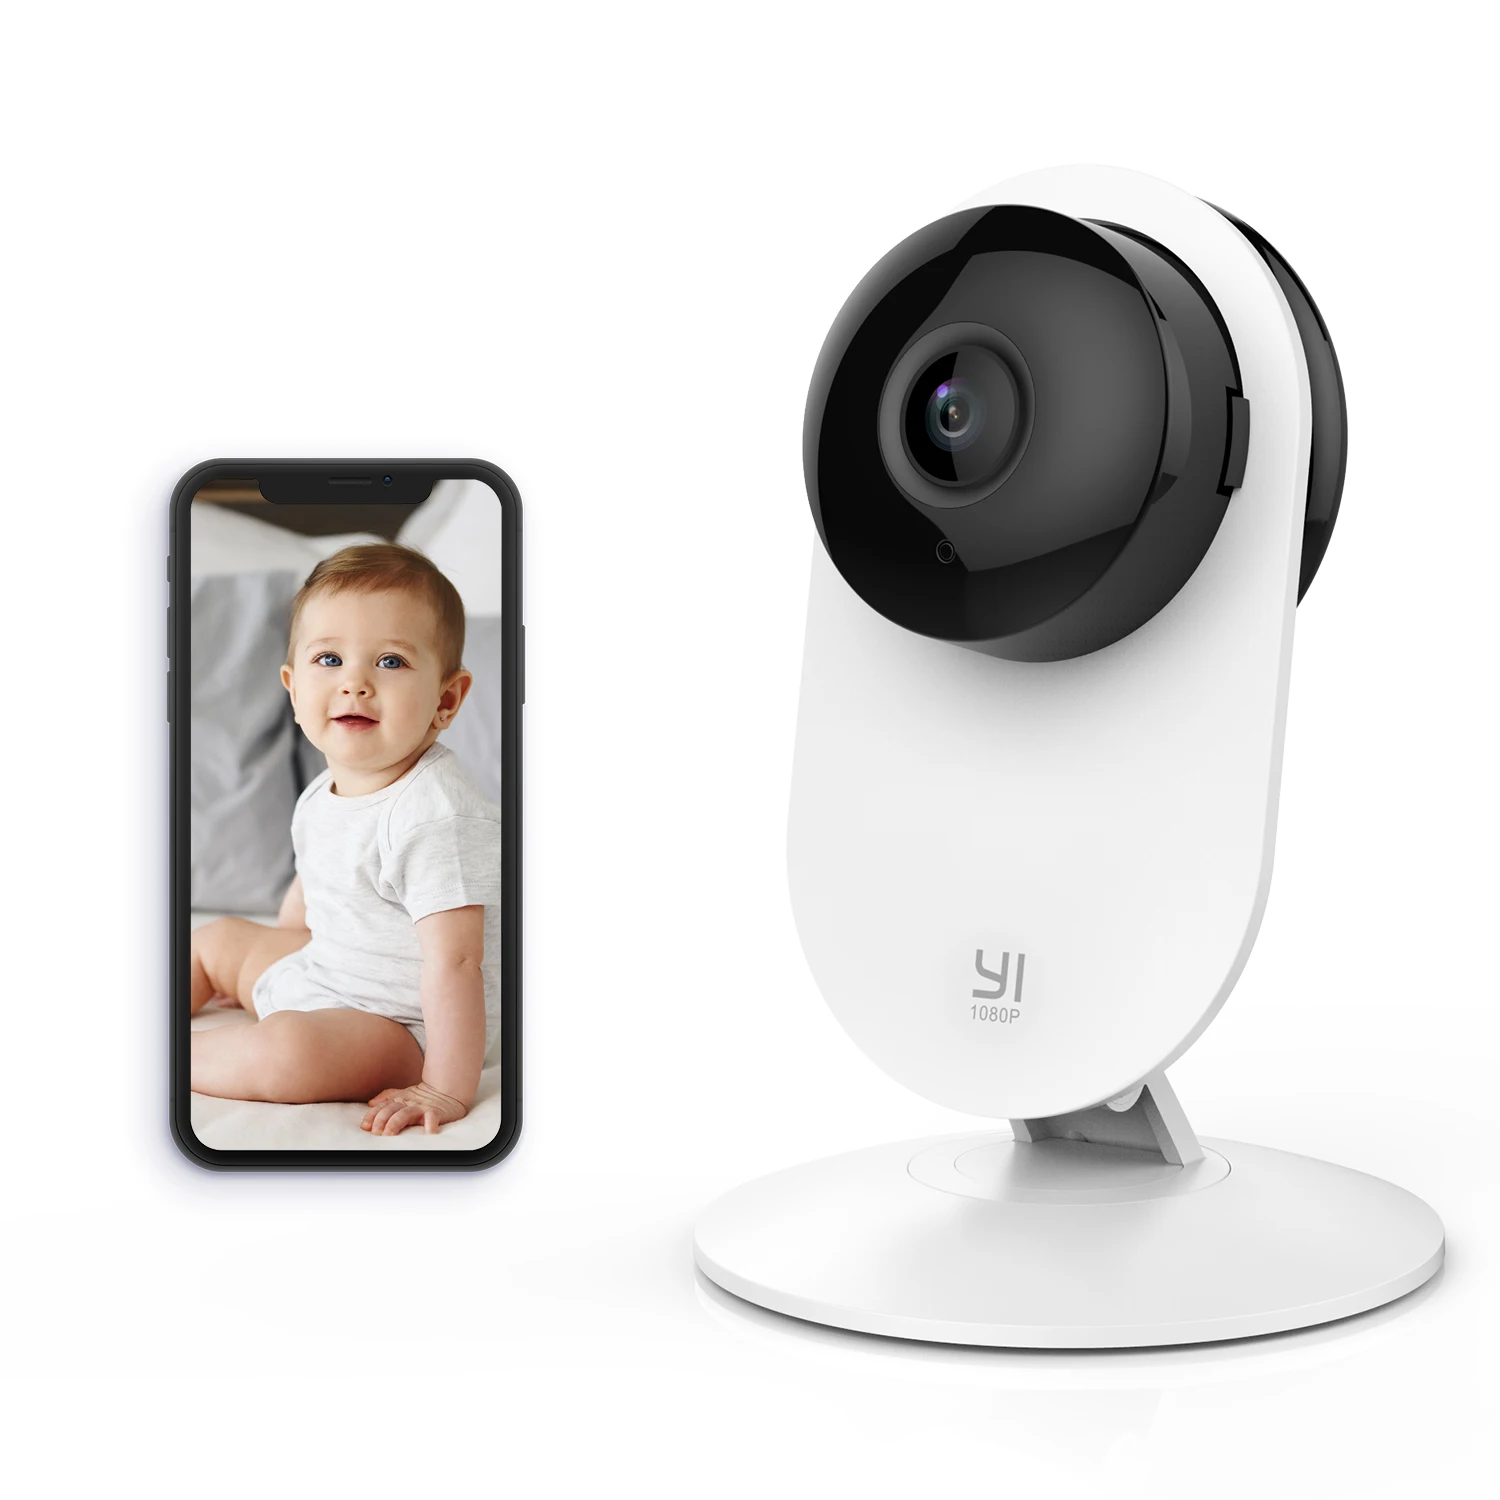 

YI Home 1080p Camera AI+ Smart Human detection Night vision Activity alerts for home Video pets baby monitor Cloud and Micro SD